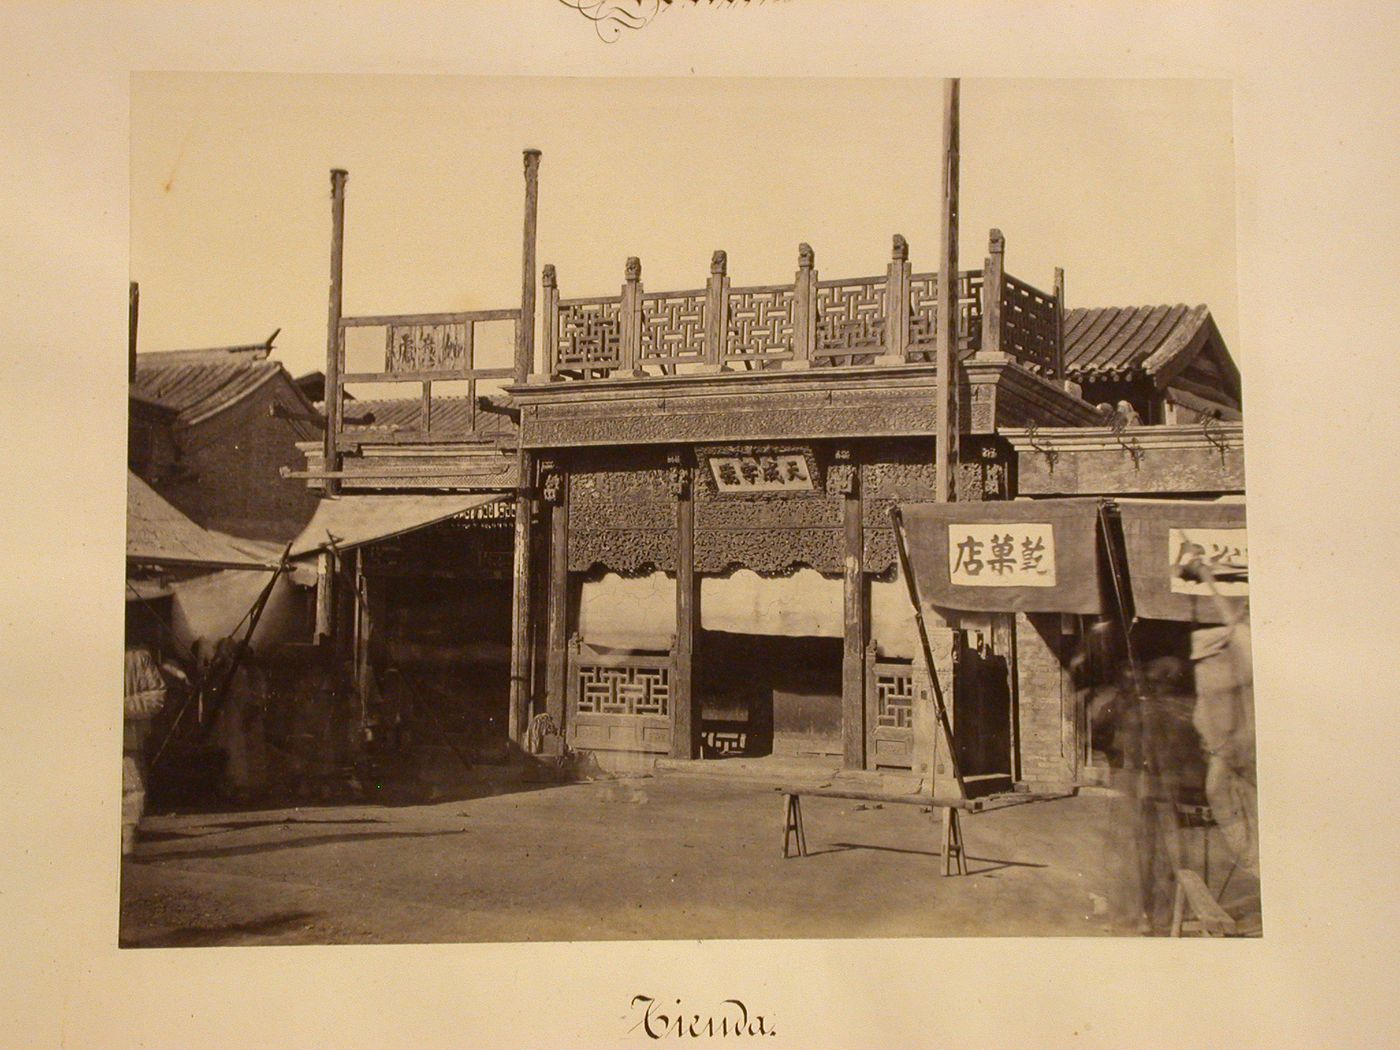 View of a store front, Peking (now Beijing), China